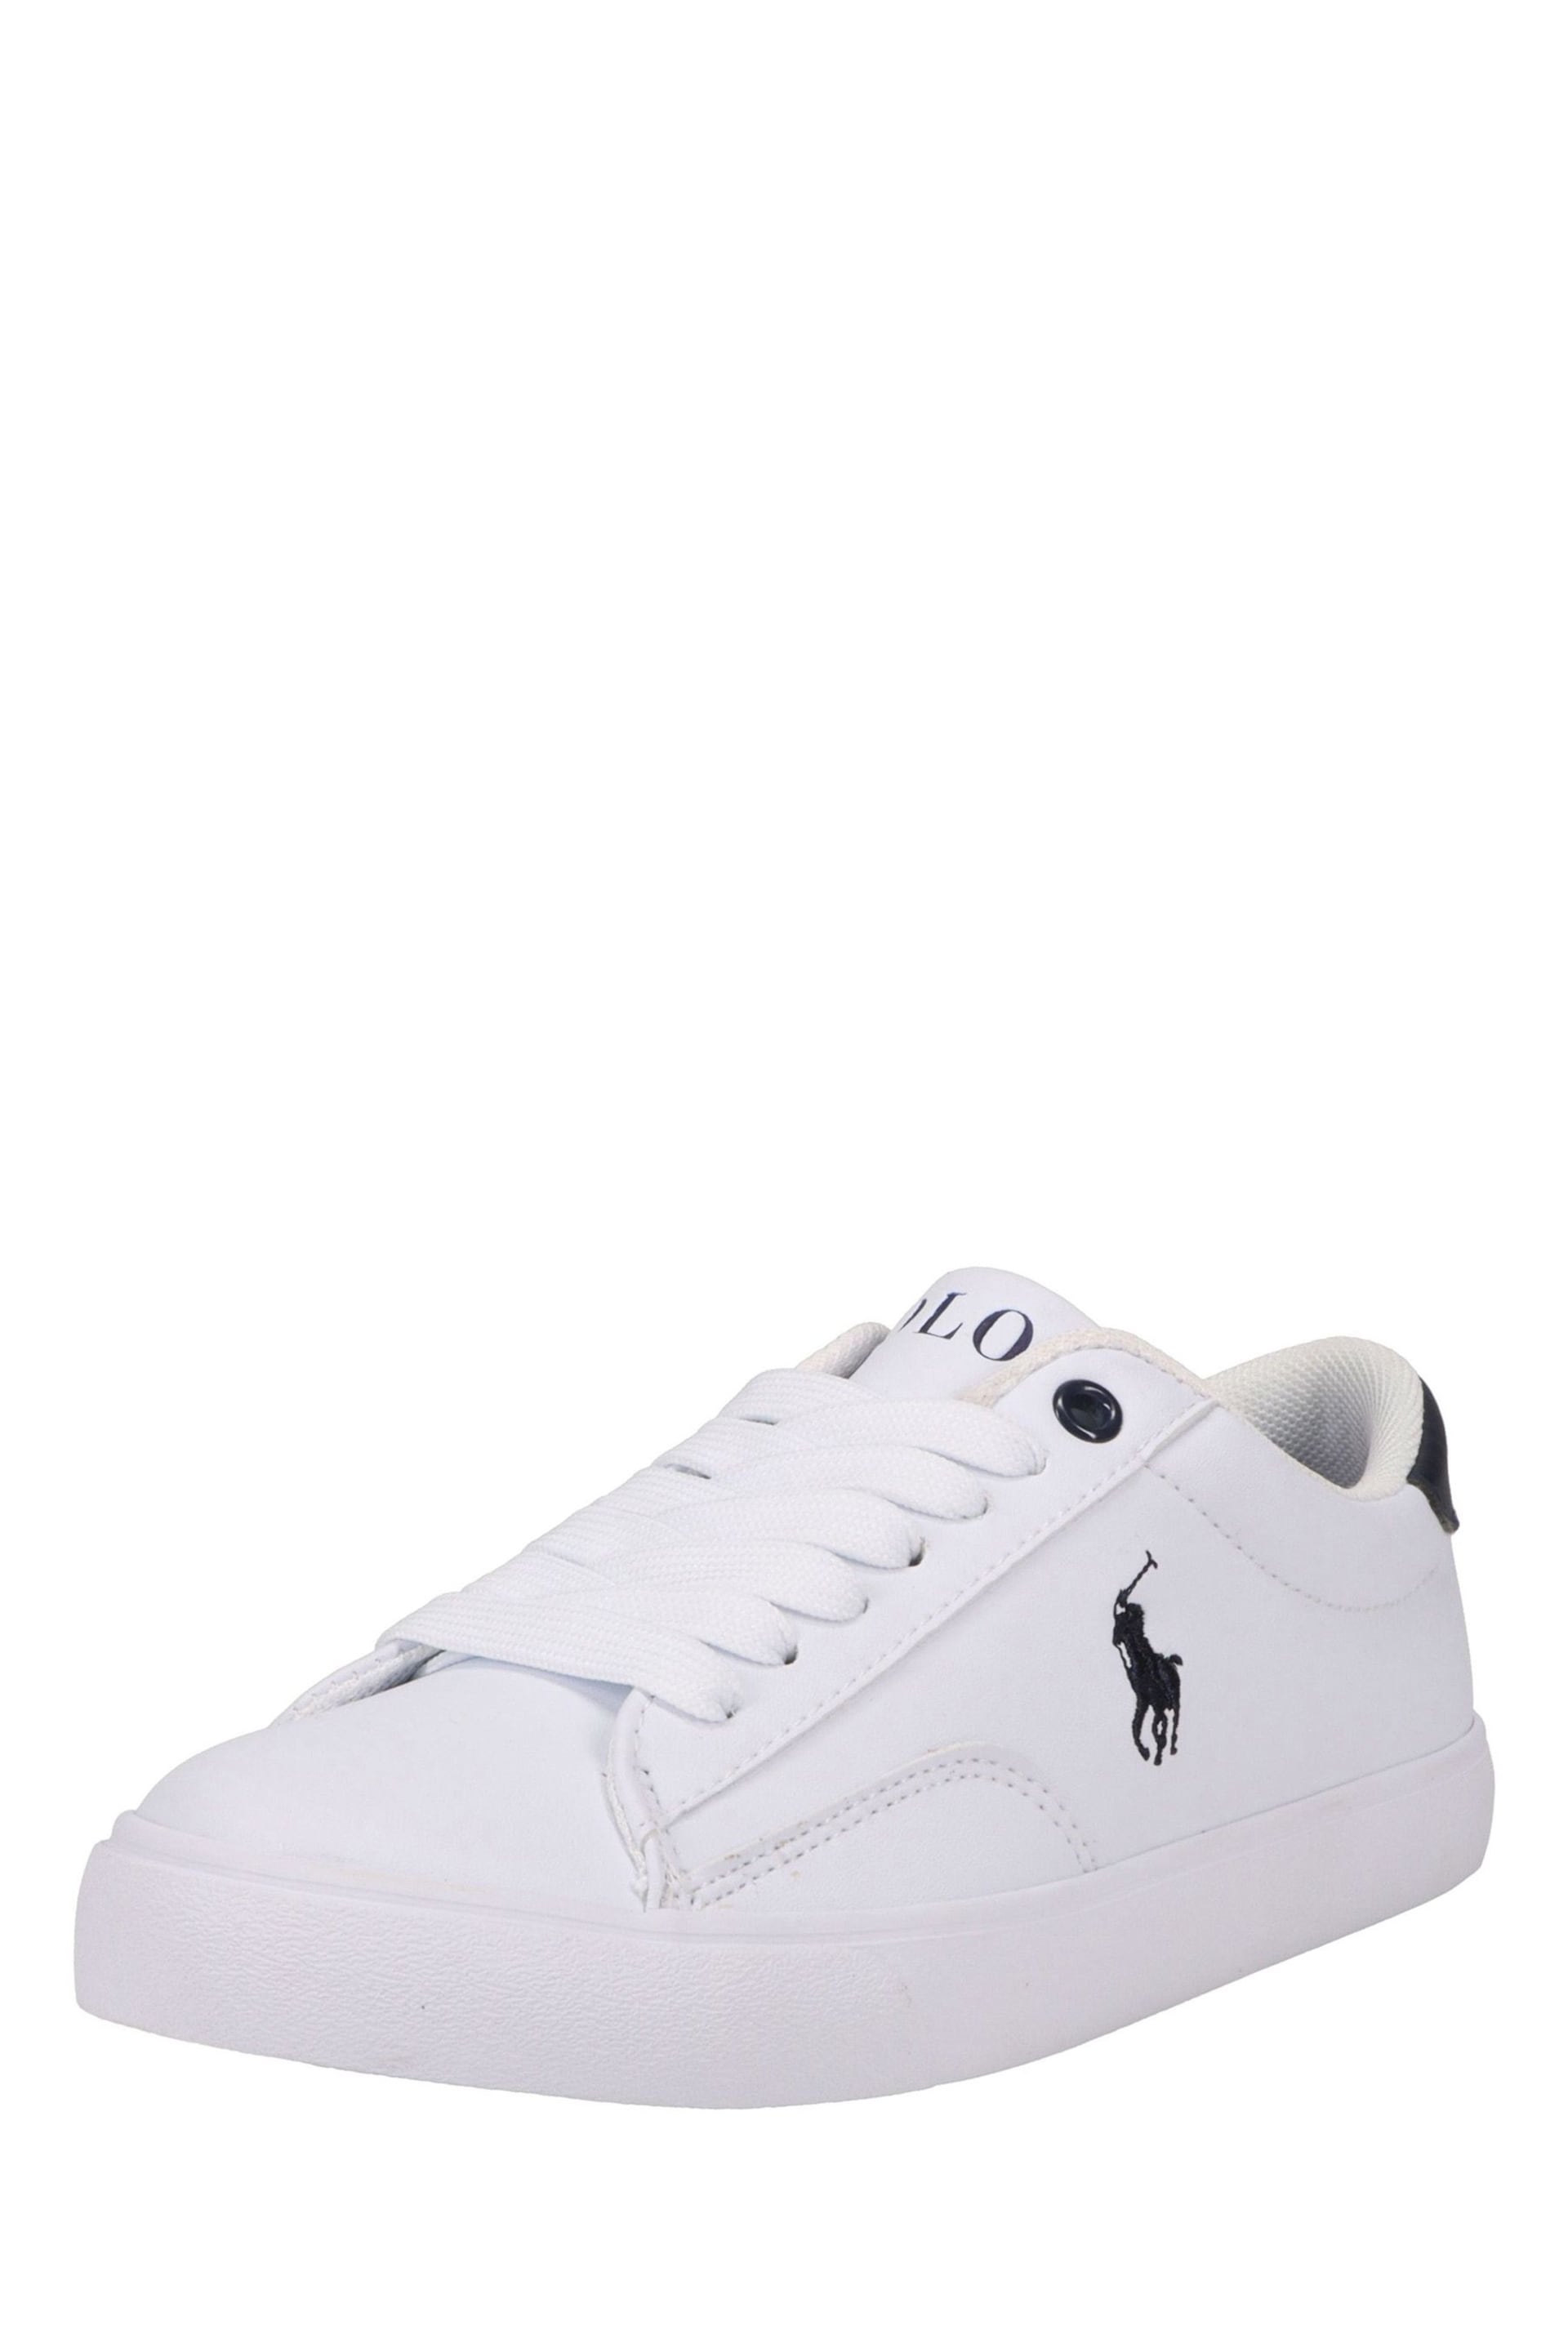 Polo Ralph Lauren White and Navy Blue Theron V Logo Trainers - Image 1 of 4